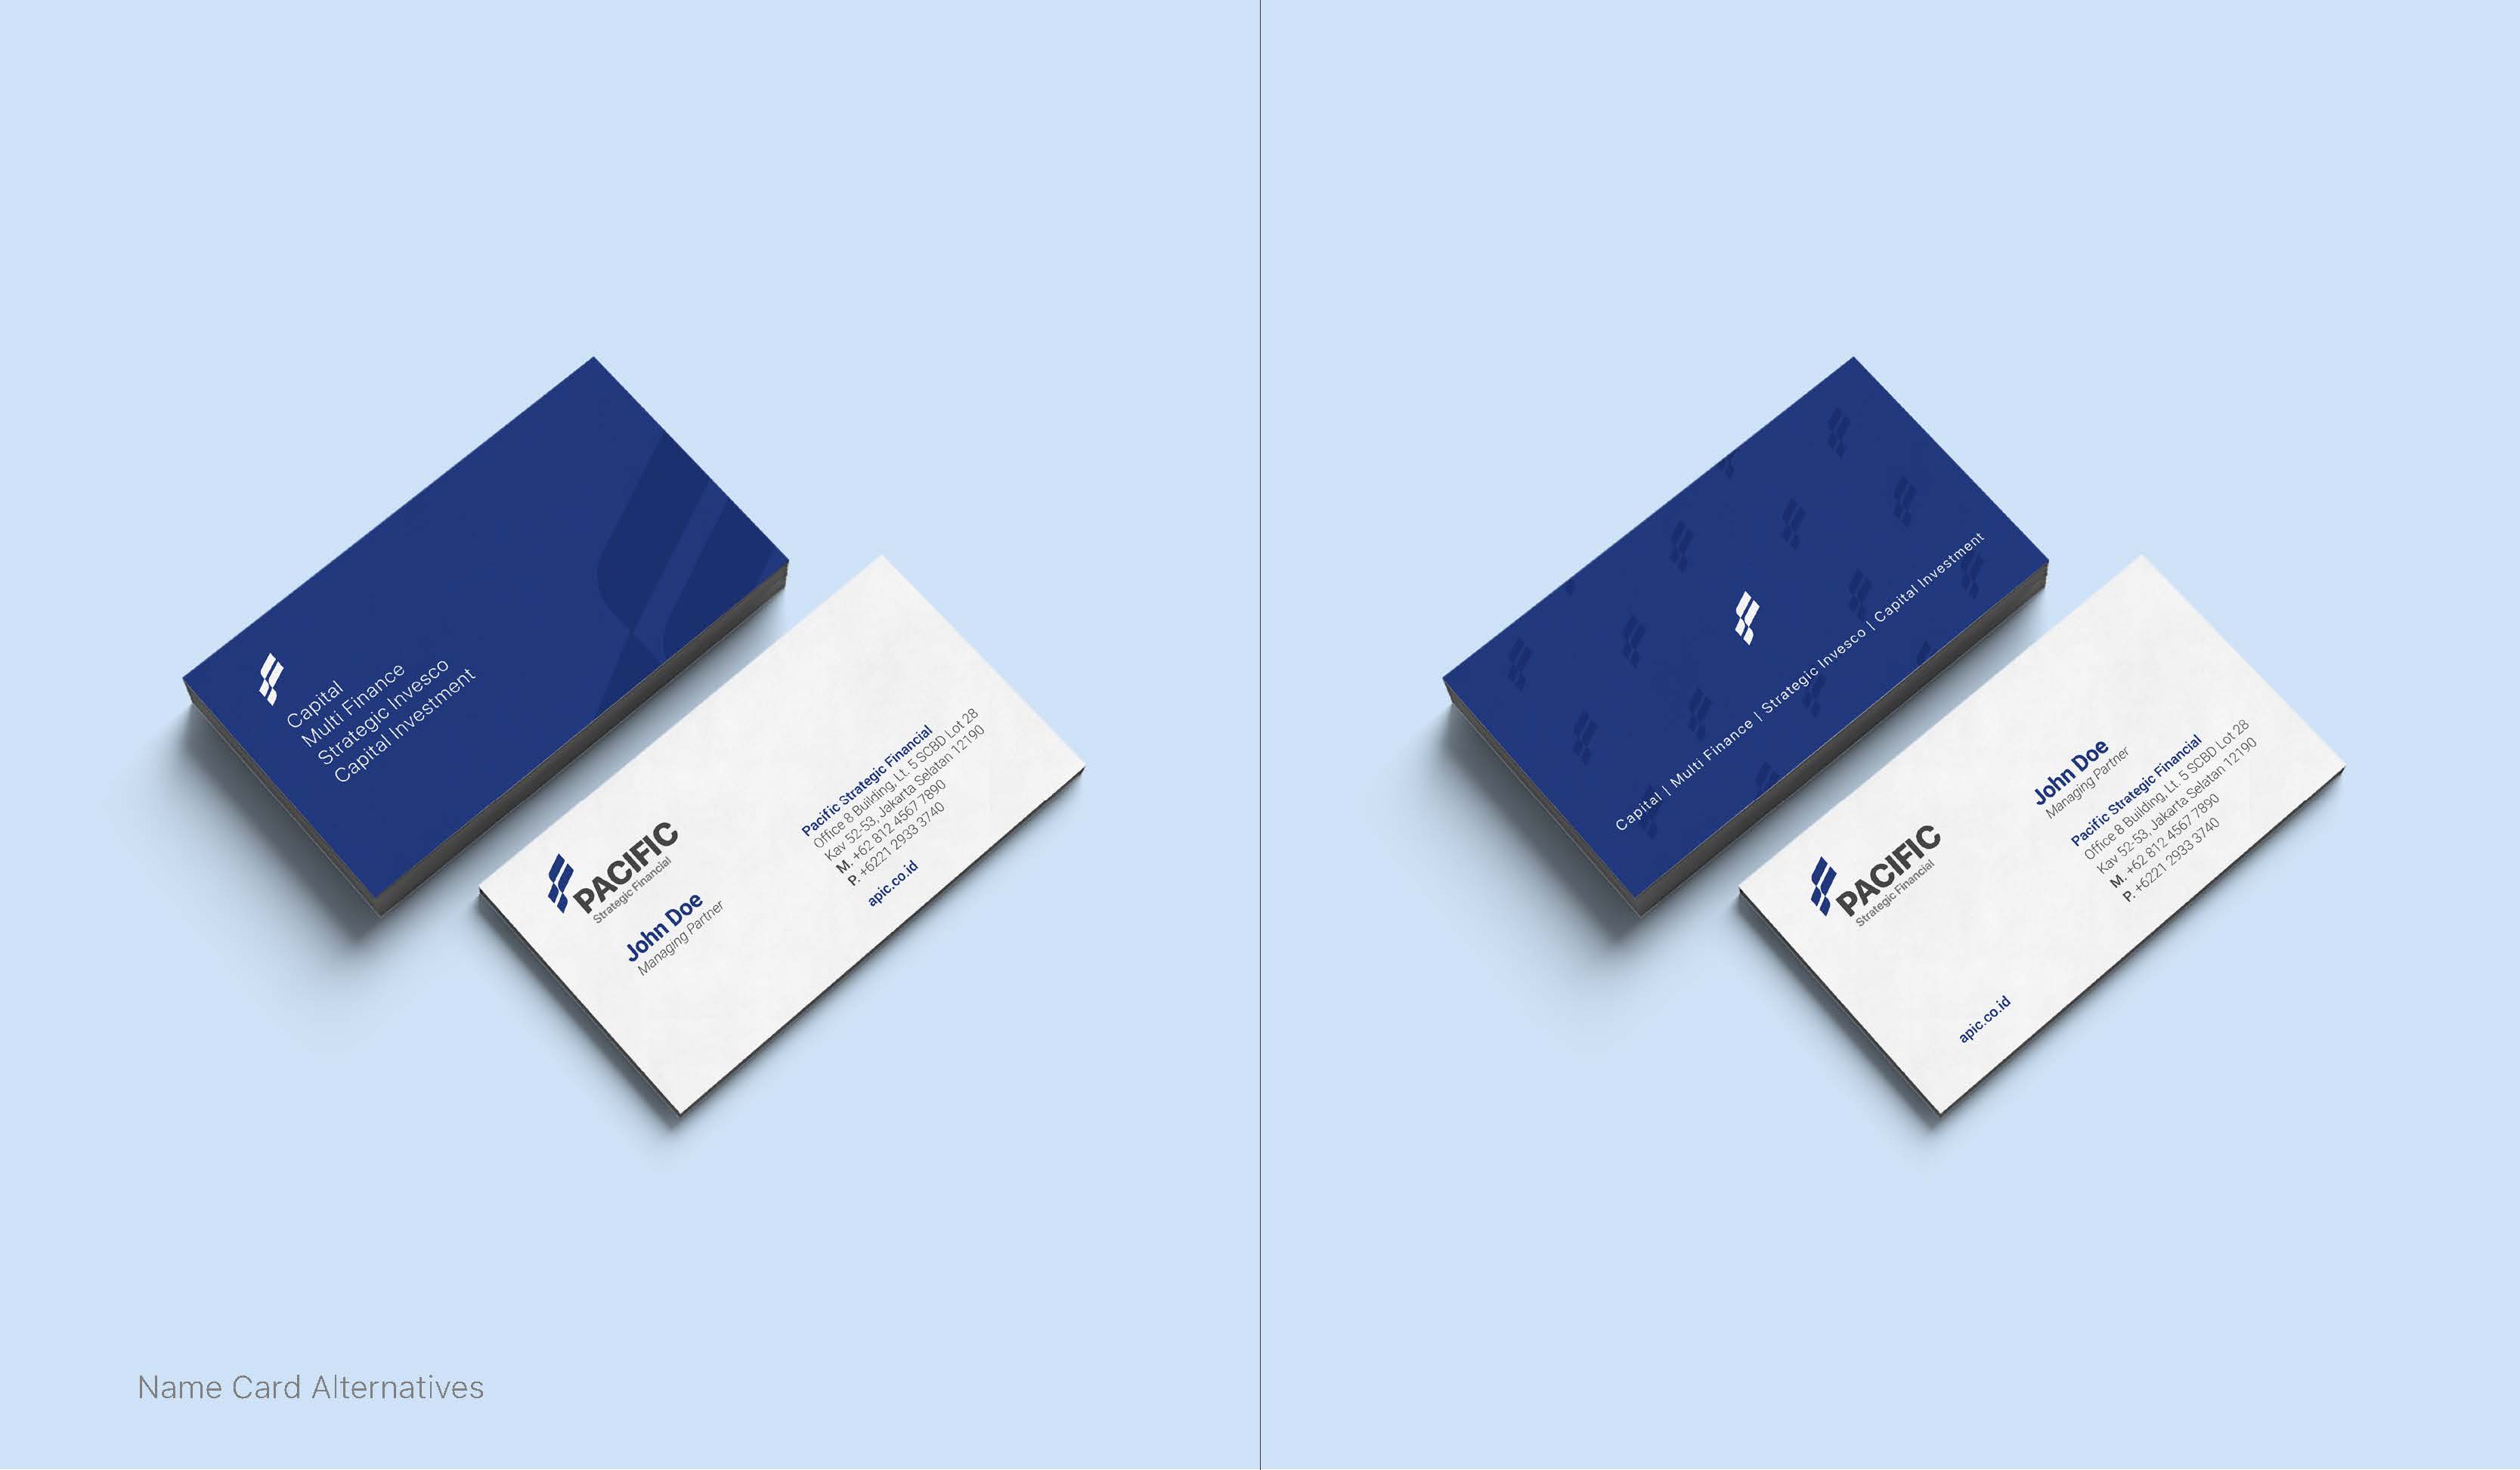 20180531 PACIFIC LOGO brand guidelines deck copy_Page_05